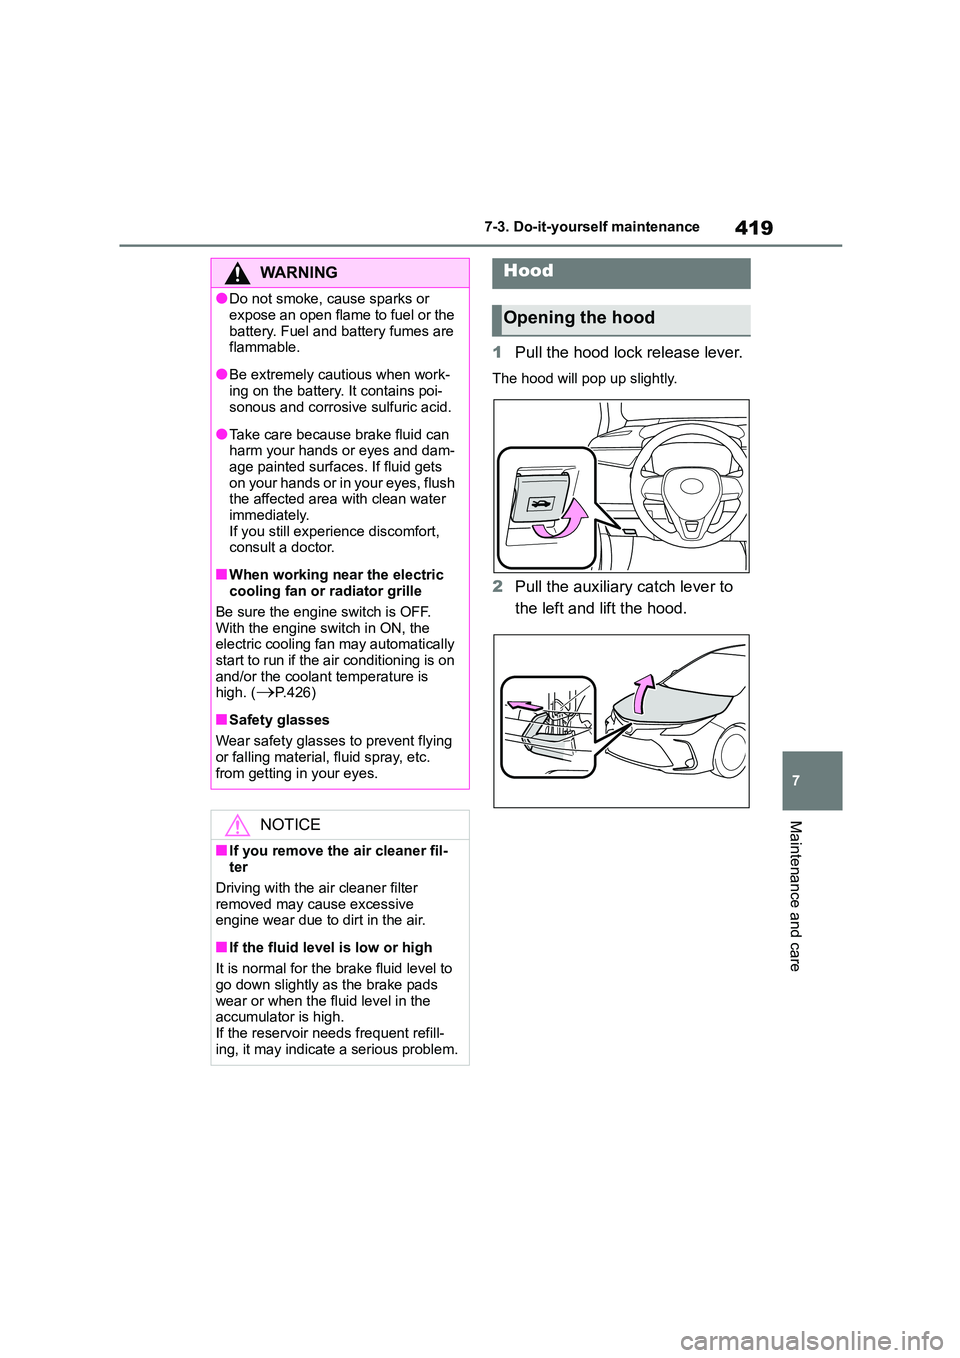 TOYOTA COROLLA 2022  Owners Manual (in English) 419
7 
7-3. Do-it-yourself maintenance
Maintenance and care
1 Pull the hood lock release lever.
The hood will pop up slightly.
2Pull the auxiliary catch lever to  
the left and lift the hood.
WA R N I